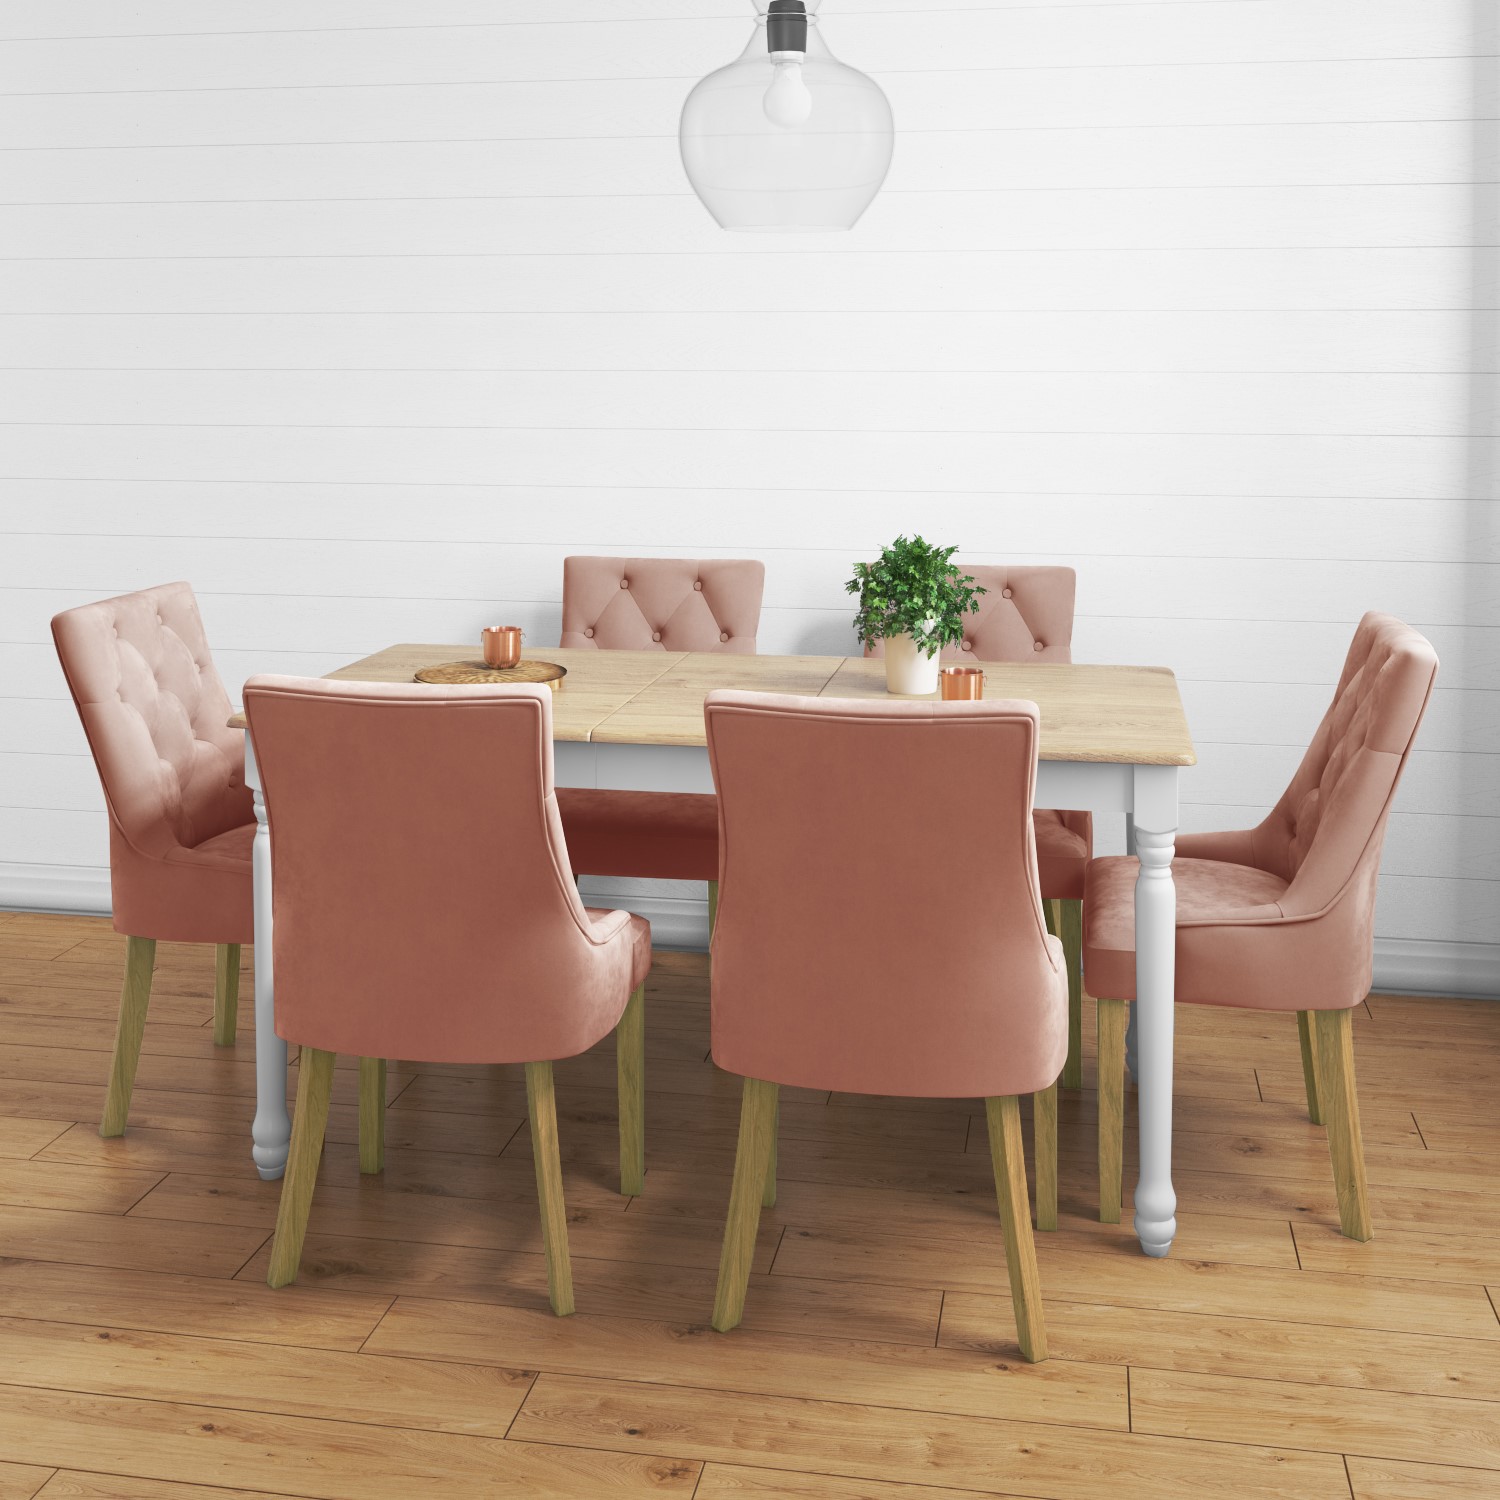 Large Extendable Dining Table In Wood, Baby Pink Dining Room Chairs